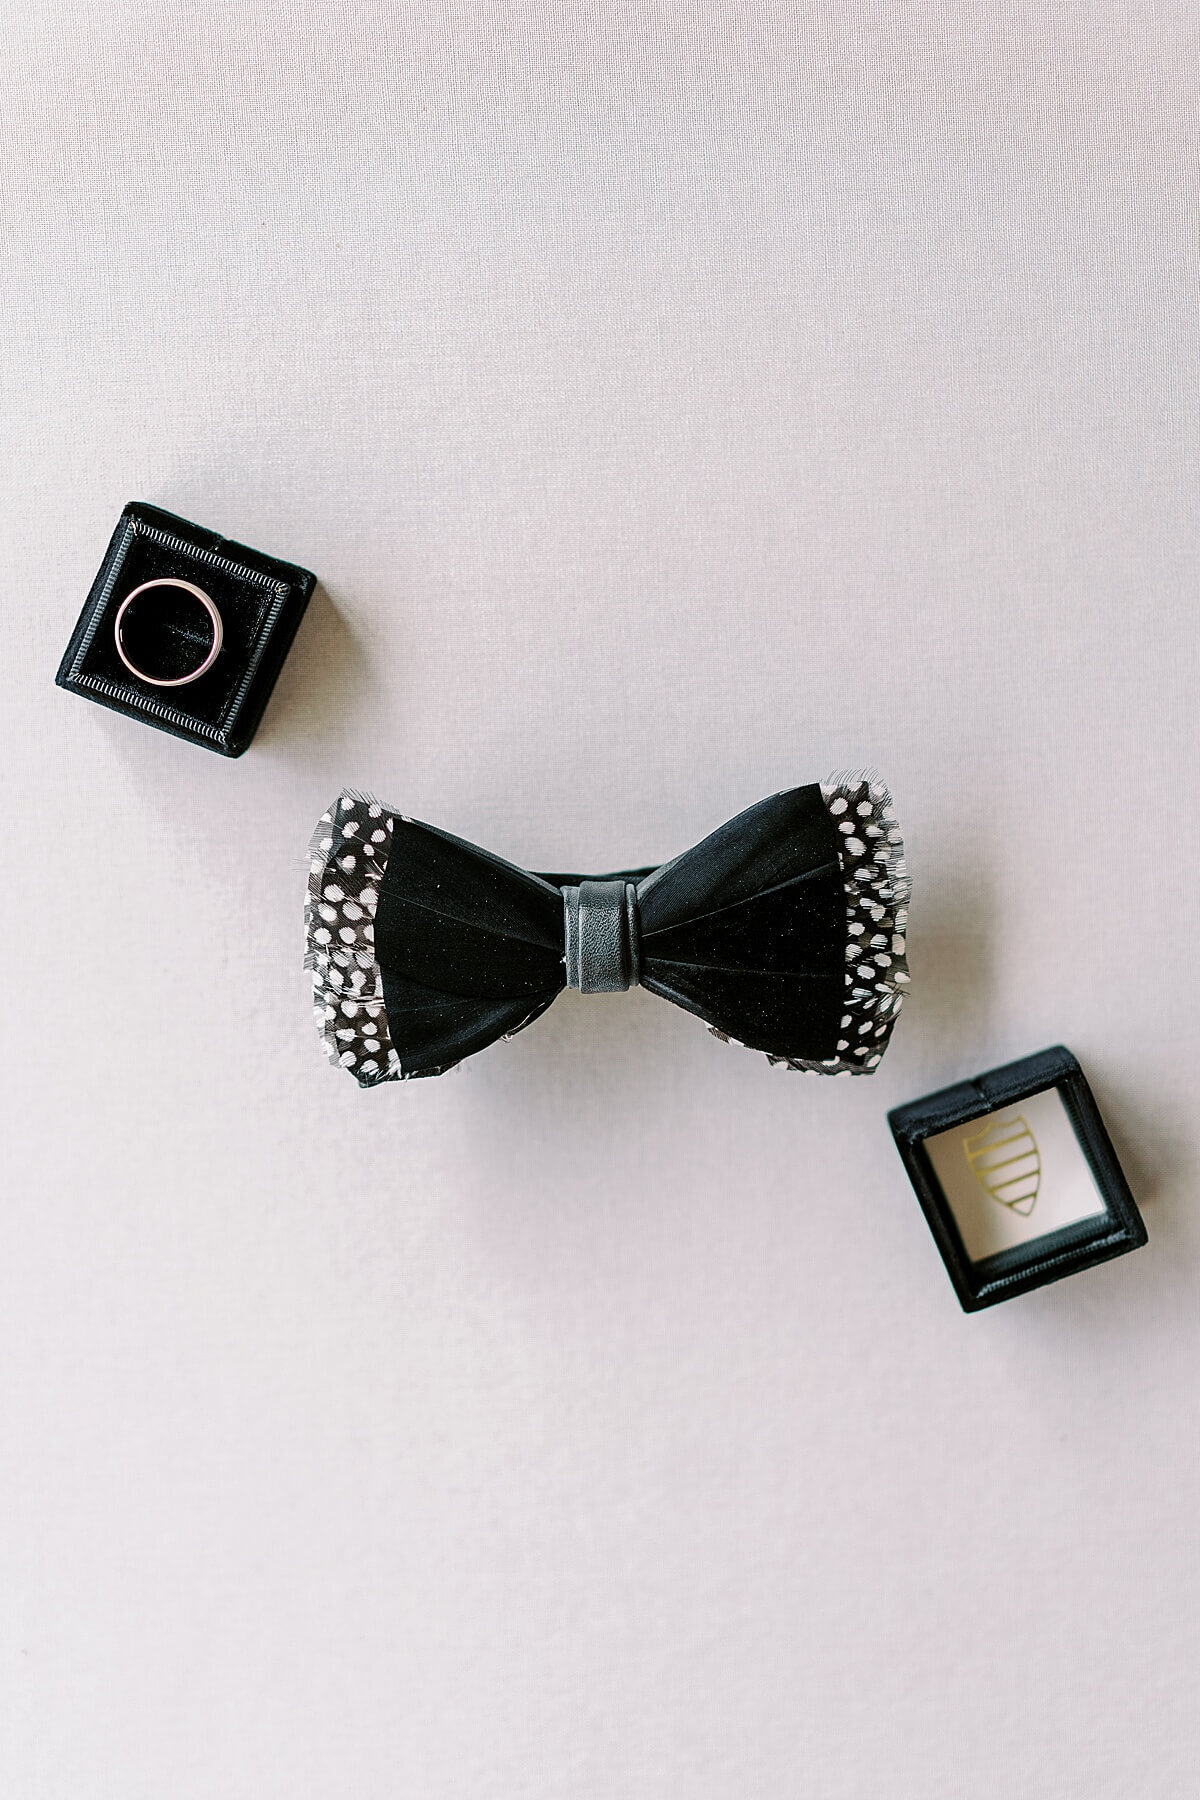 Black and White Wedding Details at The Annex Wedding Venue photographed by Alicia Yarrish Photography